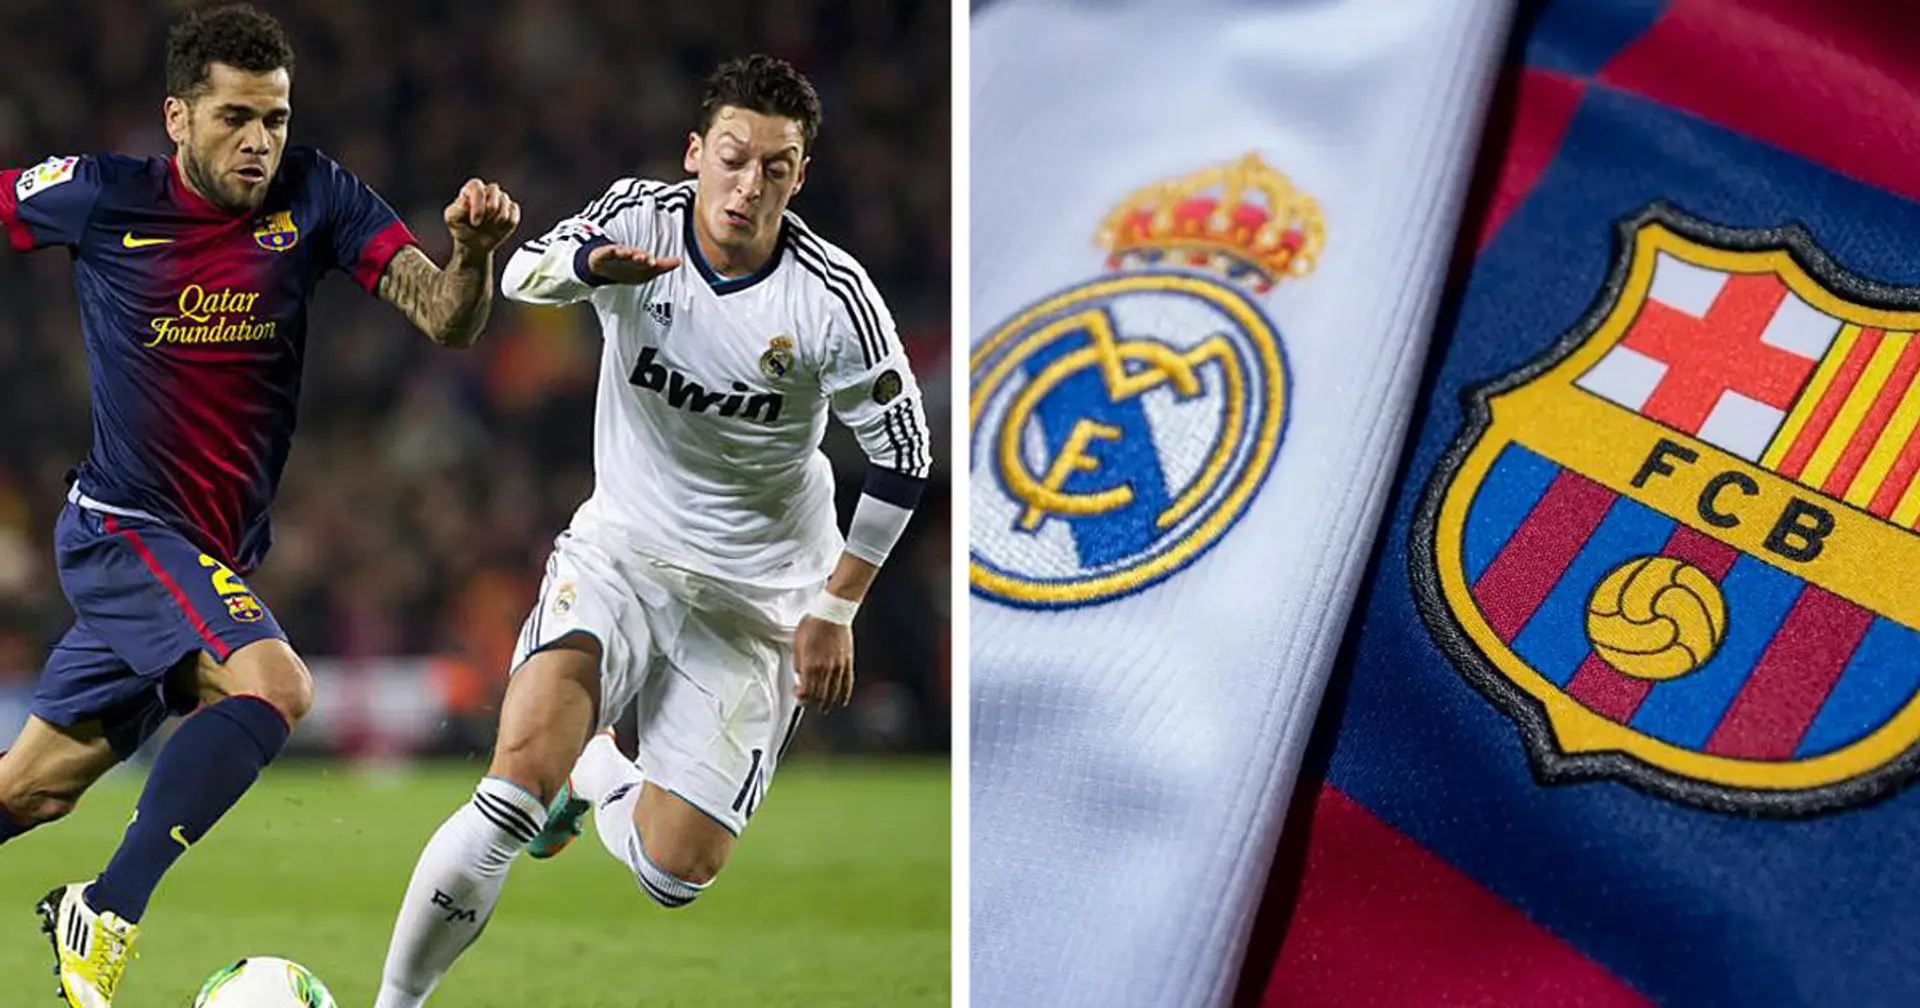 Mesut Ozil: "I think that El Clasico has gone down, which is not Real Madrid's fault - the problem is Barca"